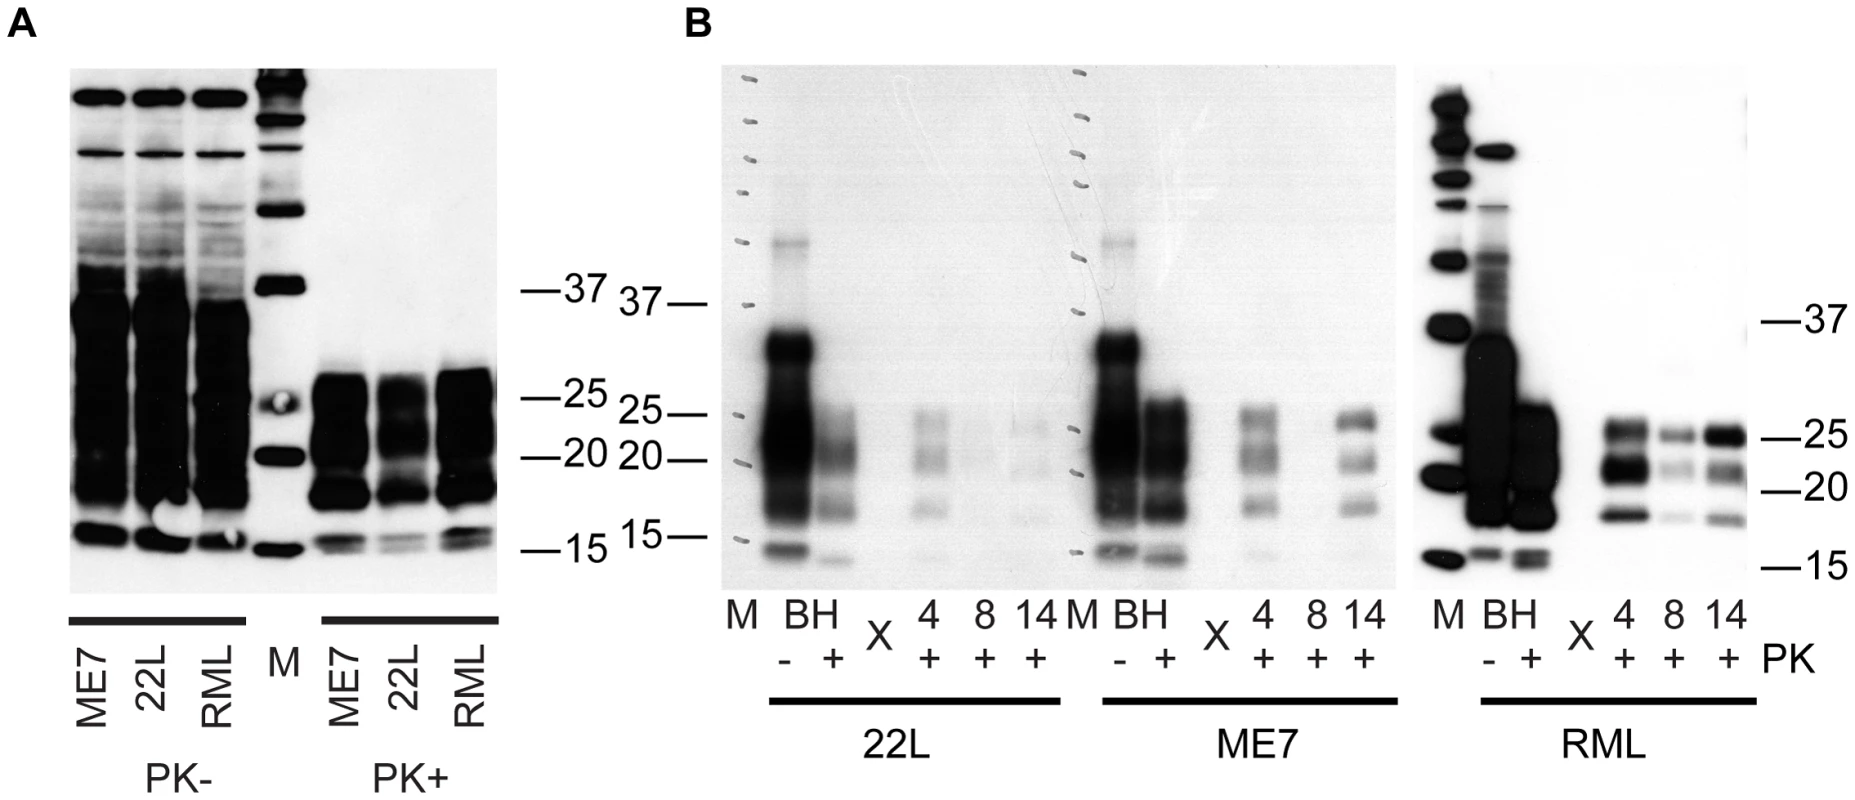 C2C12 myotubes are also susceptible to 22L and ME7 prions.